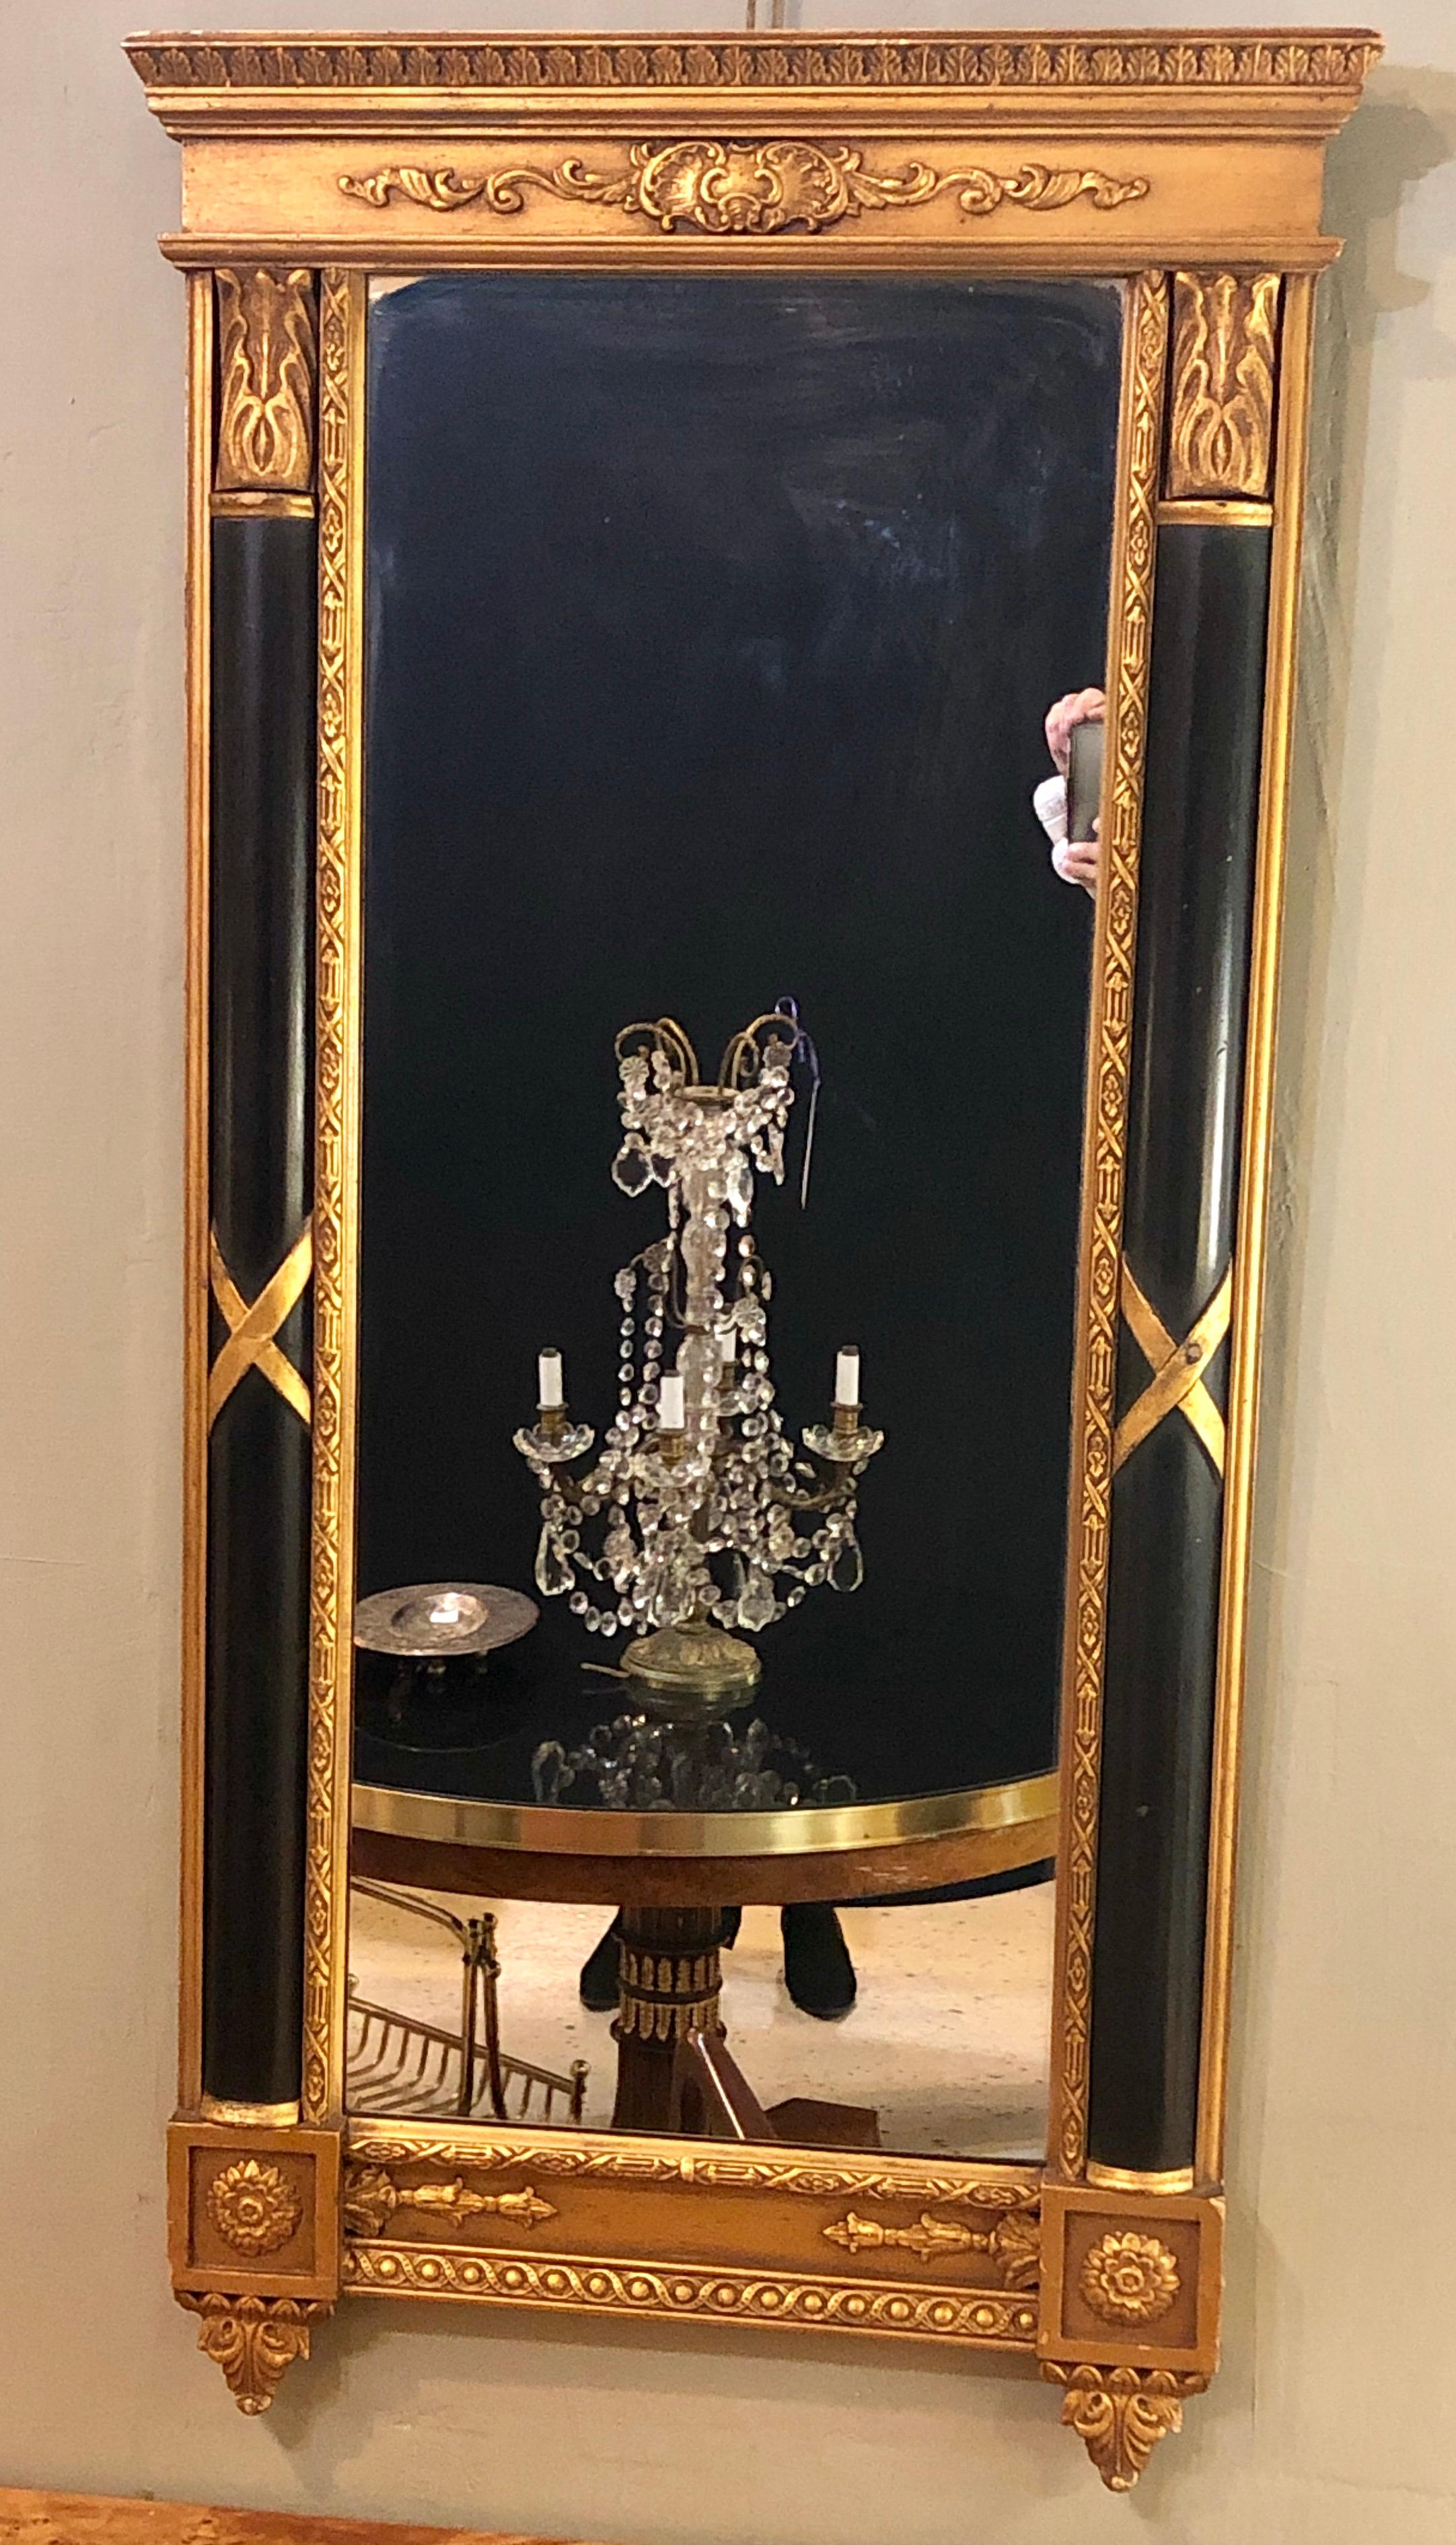 Italian Hollywood Regency ebony and gilt decorated wall or console mirror in the style of Maison Jansen. This mirror has a rectangular form with rosettes and an X-design modern carvings. The mirror would look stunning over an ebony commode or